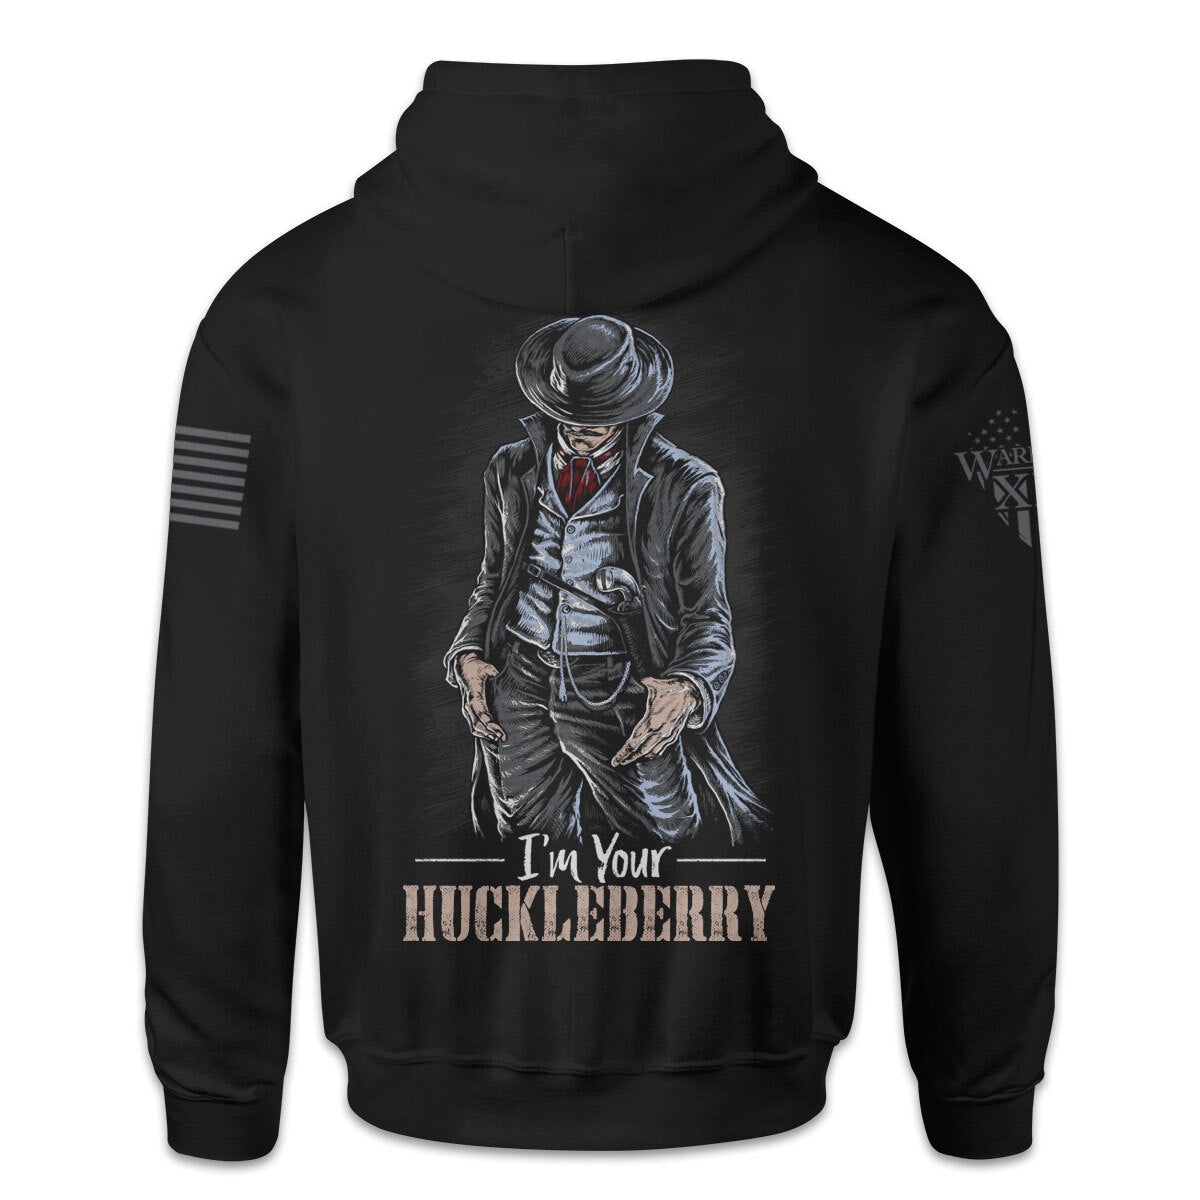 A black hoodie with the words "I'm your Huckleberry" with a cowboy printed on the back of the shirt.